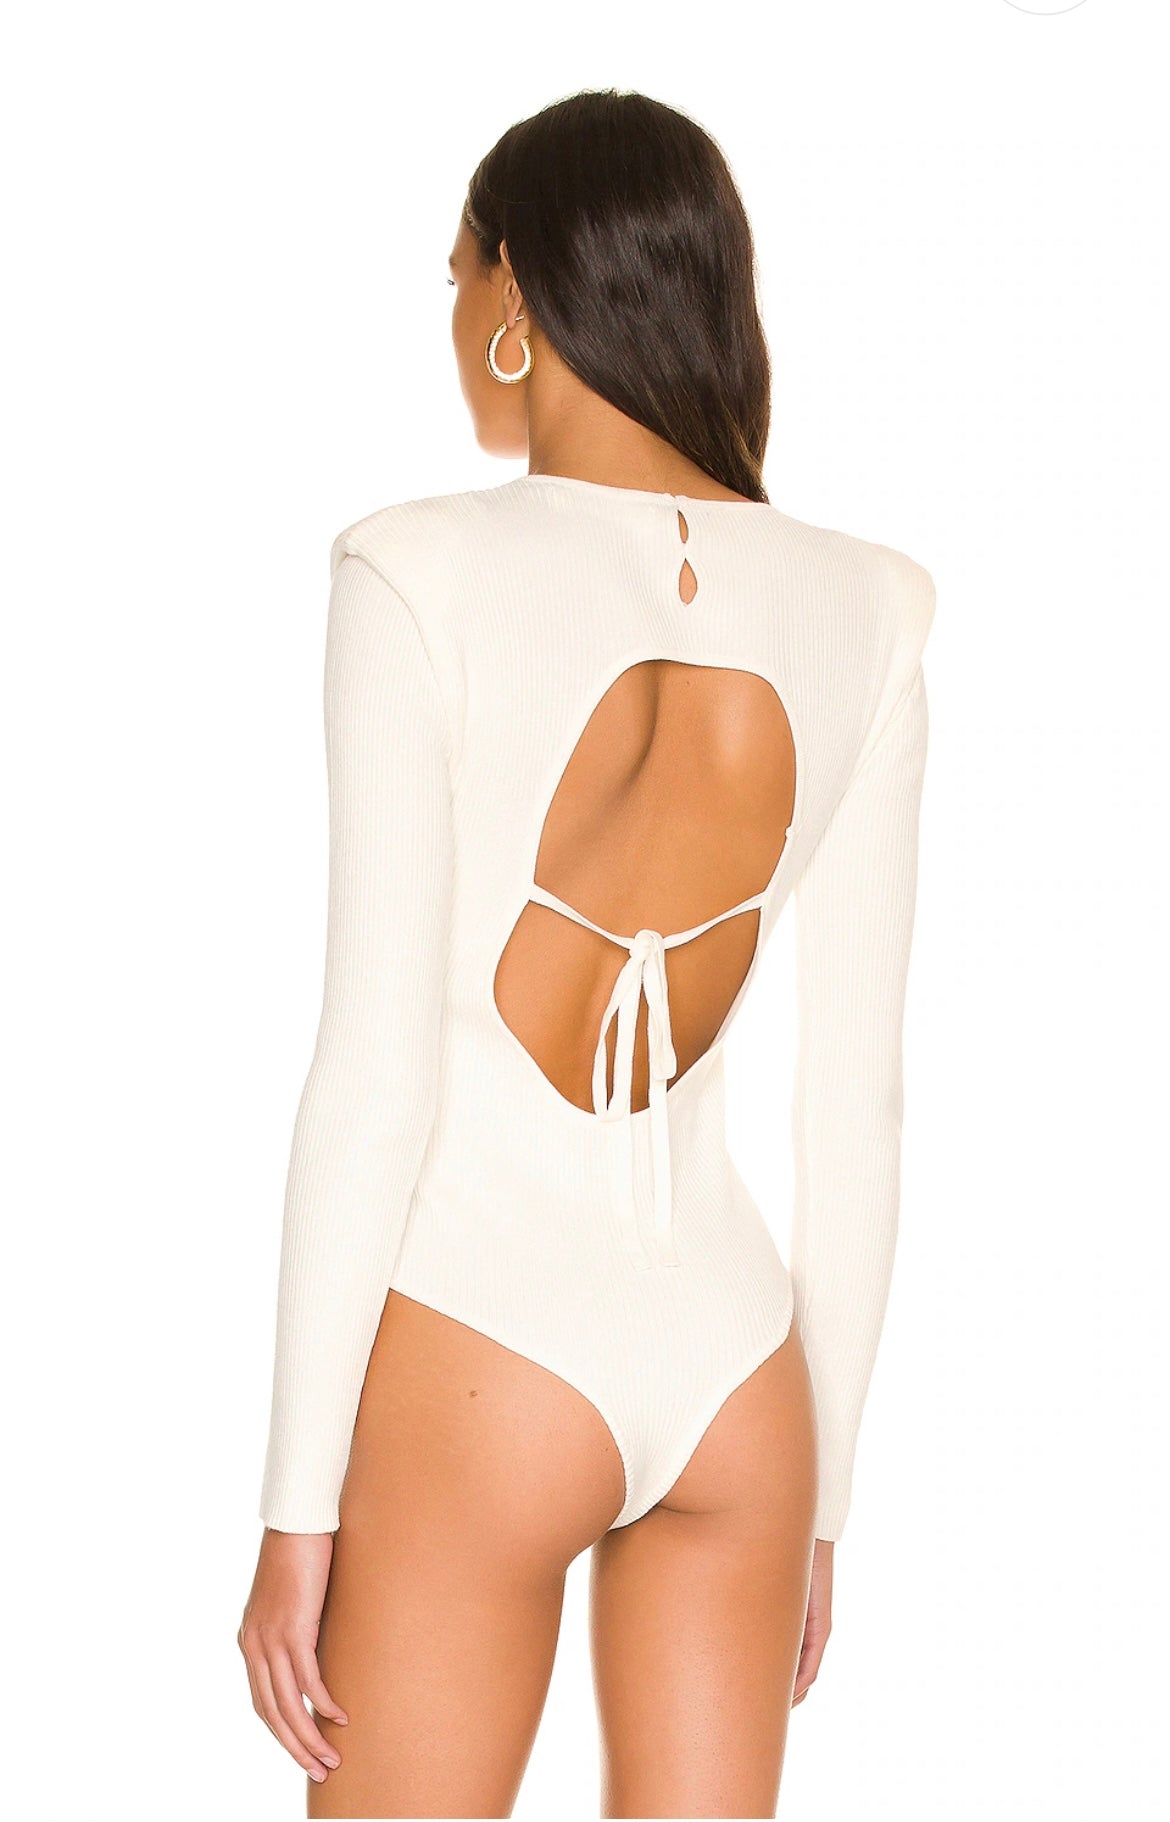 UNIKONCEPT Lifestyle Boutique and Lounge; Arabella tie-back cutout bodysuit by ASTR the Label. White ribbed bodysuit with back tie detail and open back. Shoulder pads.